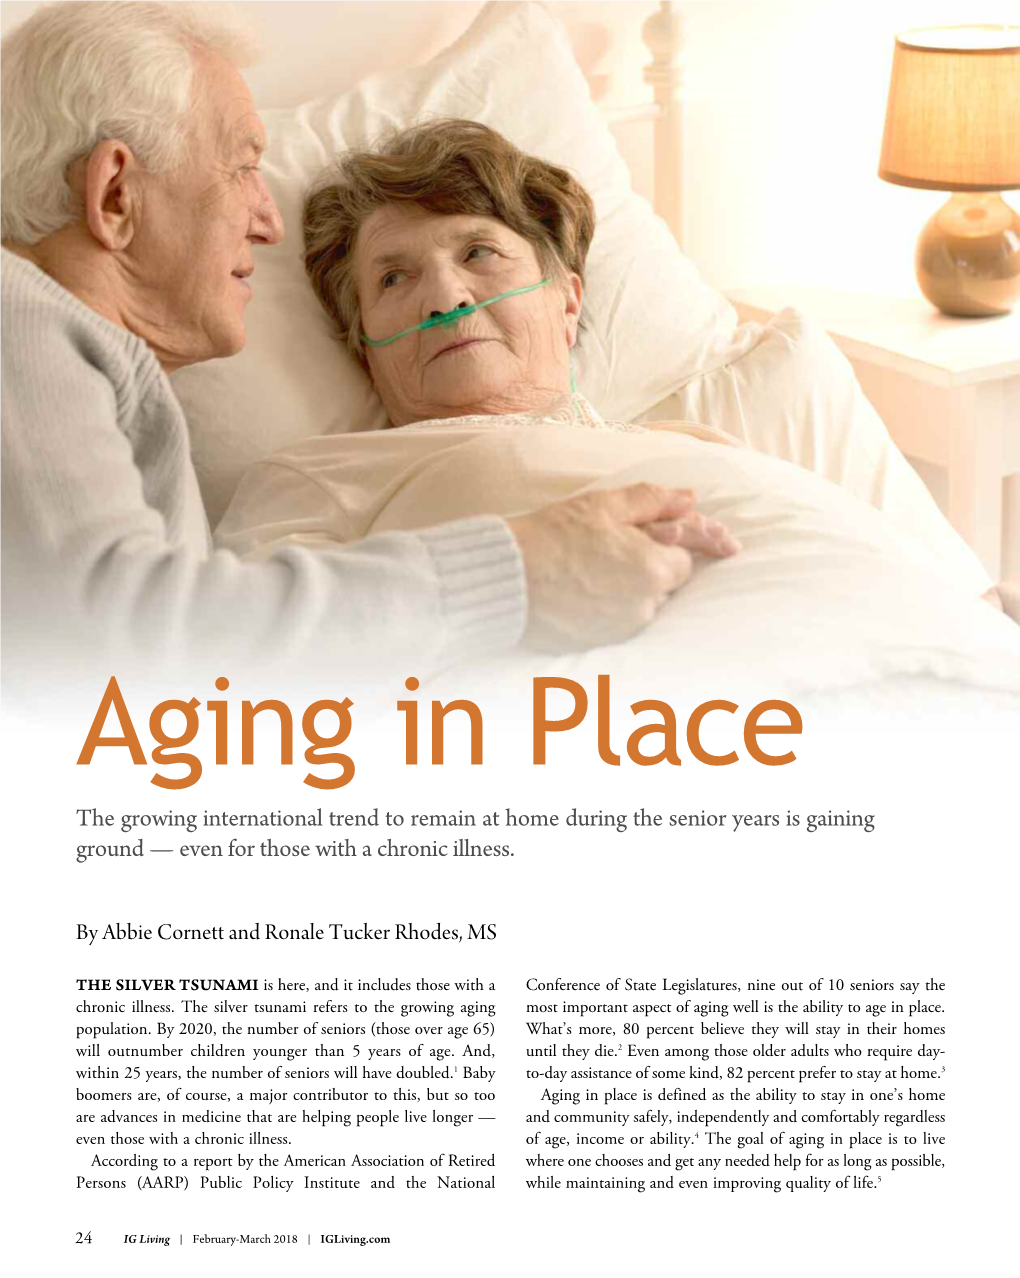 Aging in Place the Growing International Trend to Remain at Home During the Senior Years Is Gaining Ground — Even for Those with a Chronic Illness